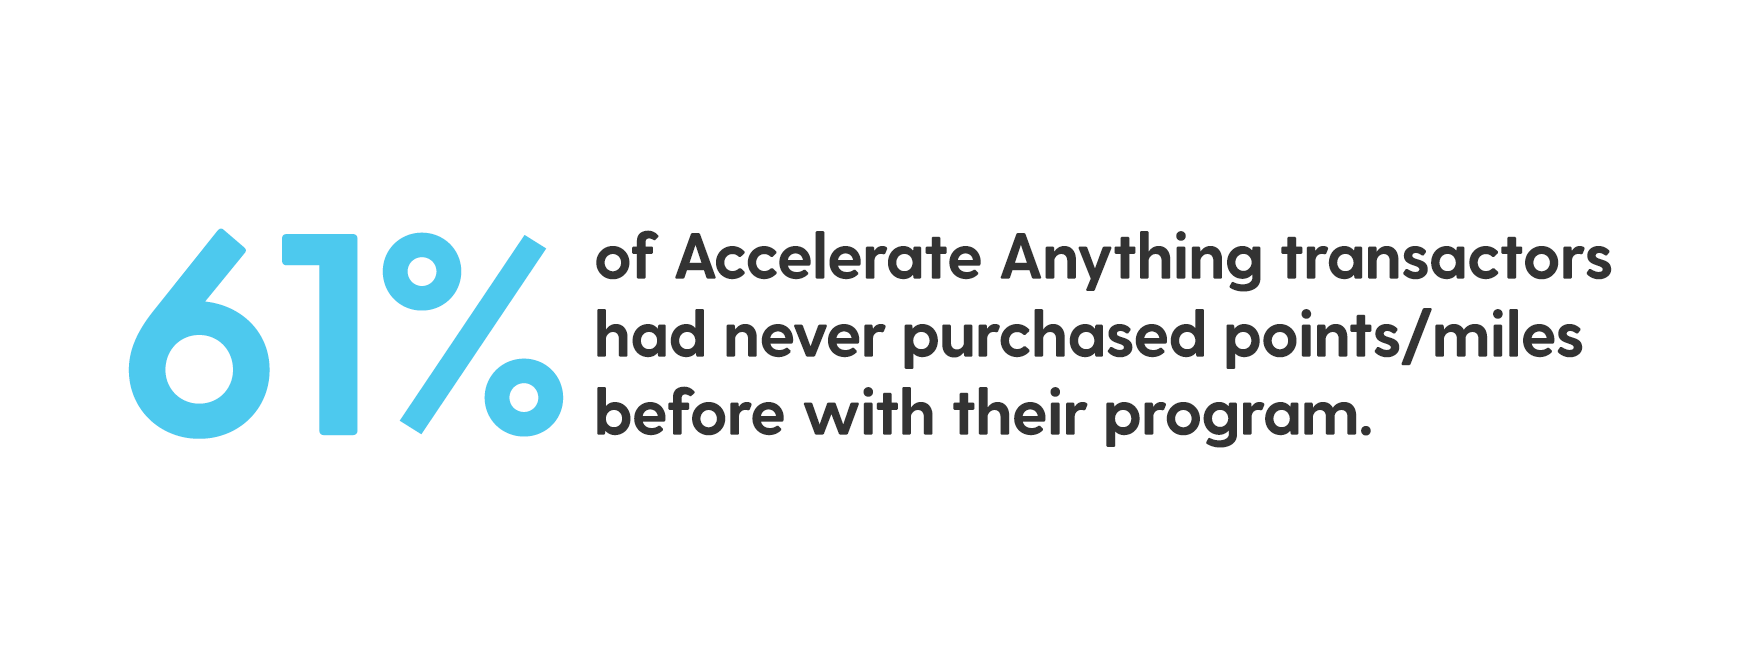 Statistic: 61% of Accelerate Anything transactors had never purchased points/miles before with their program.